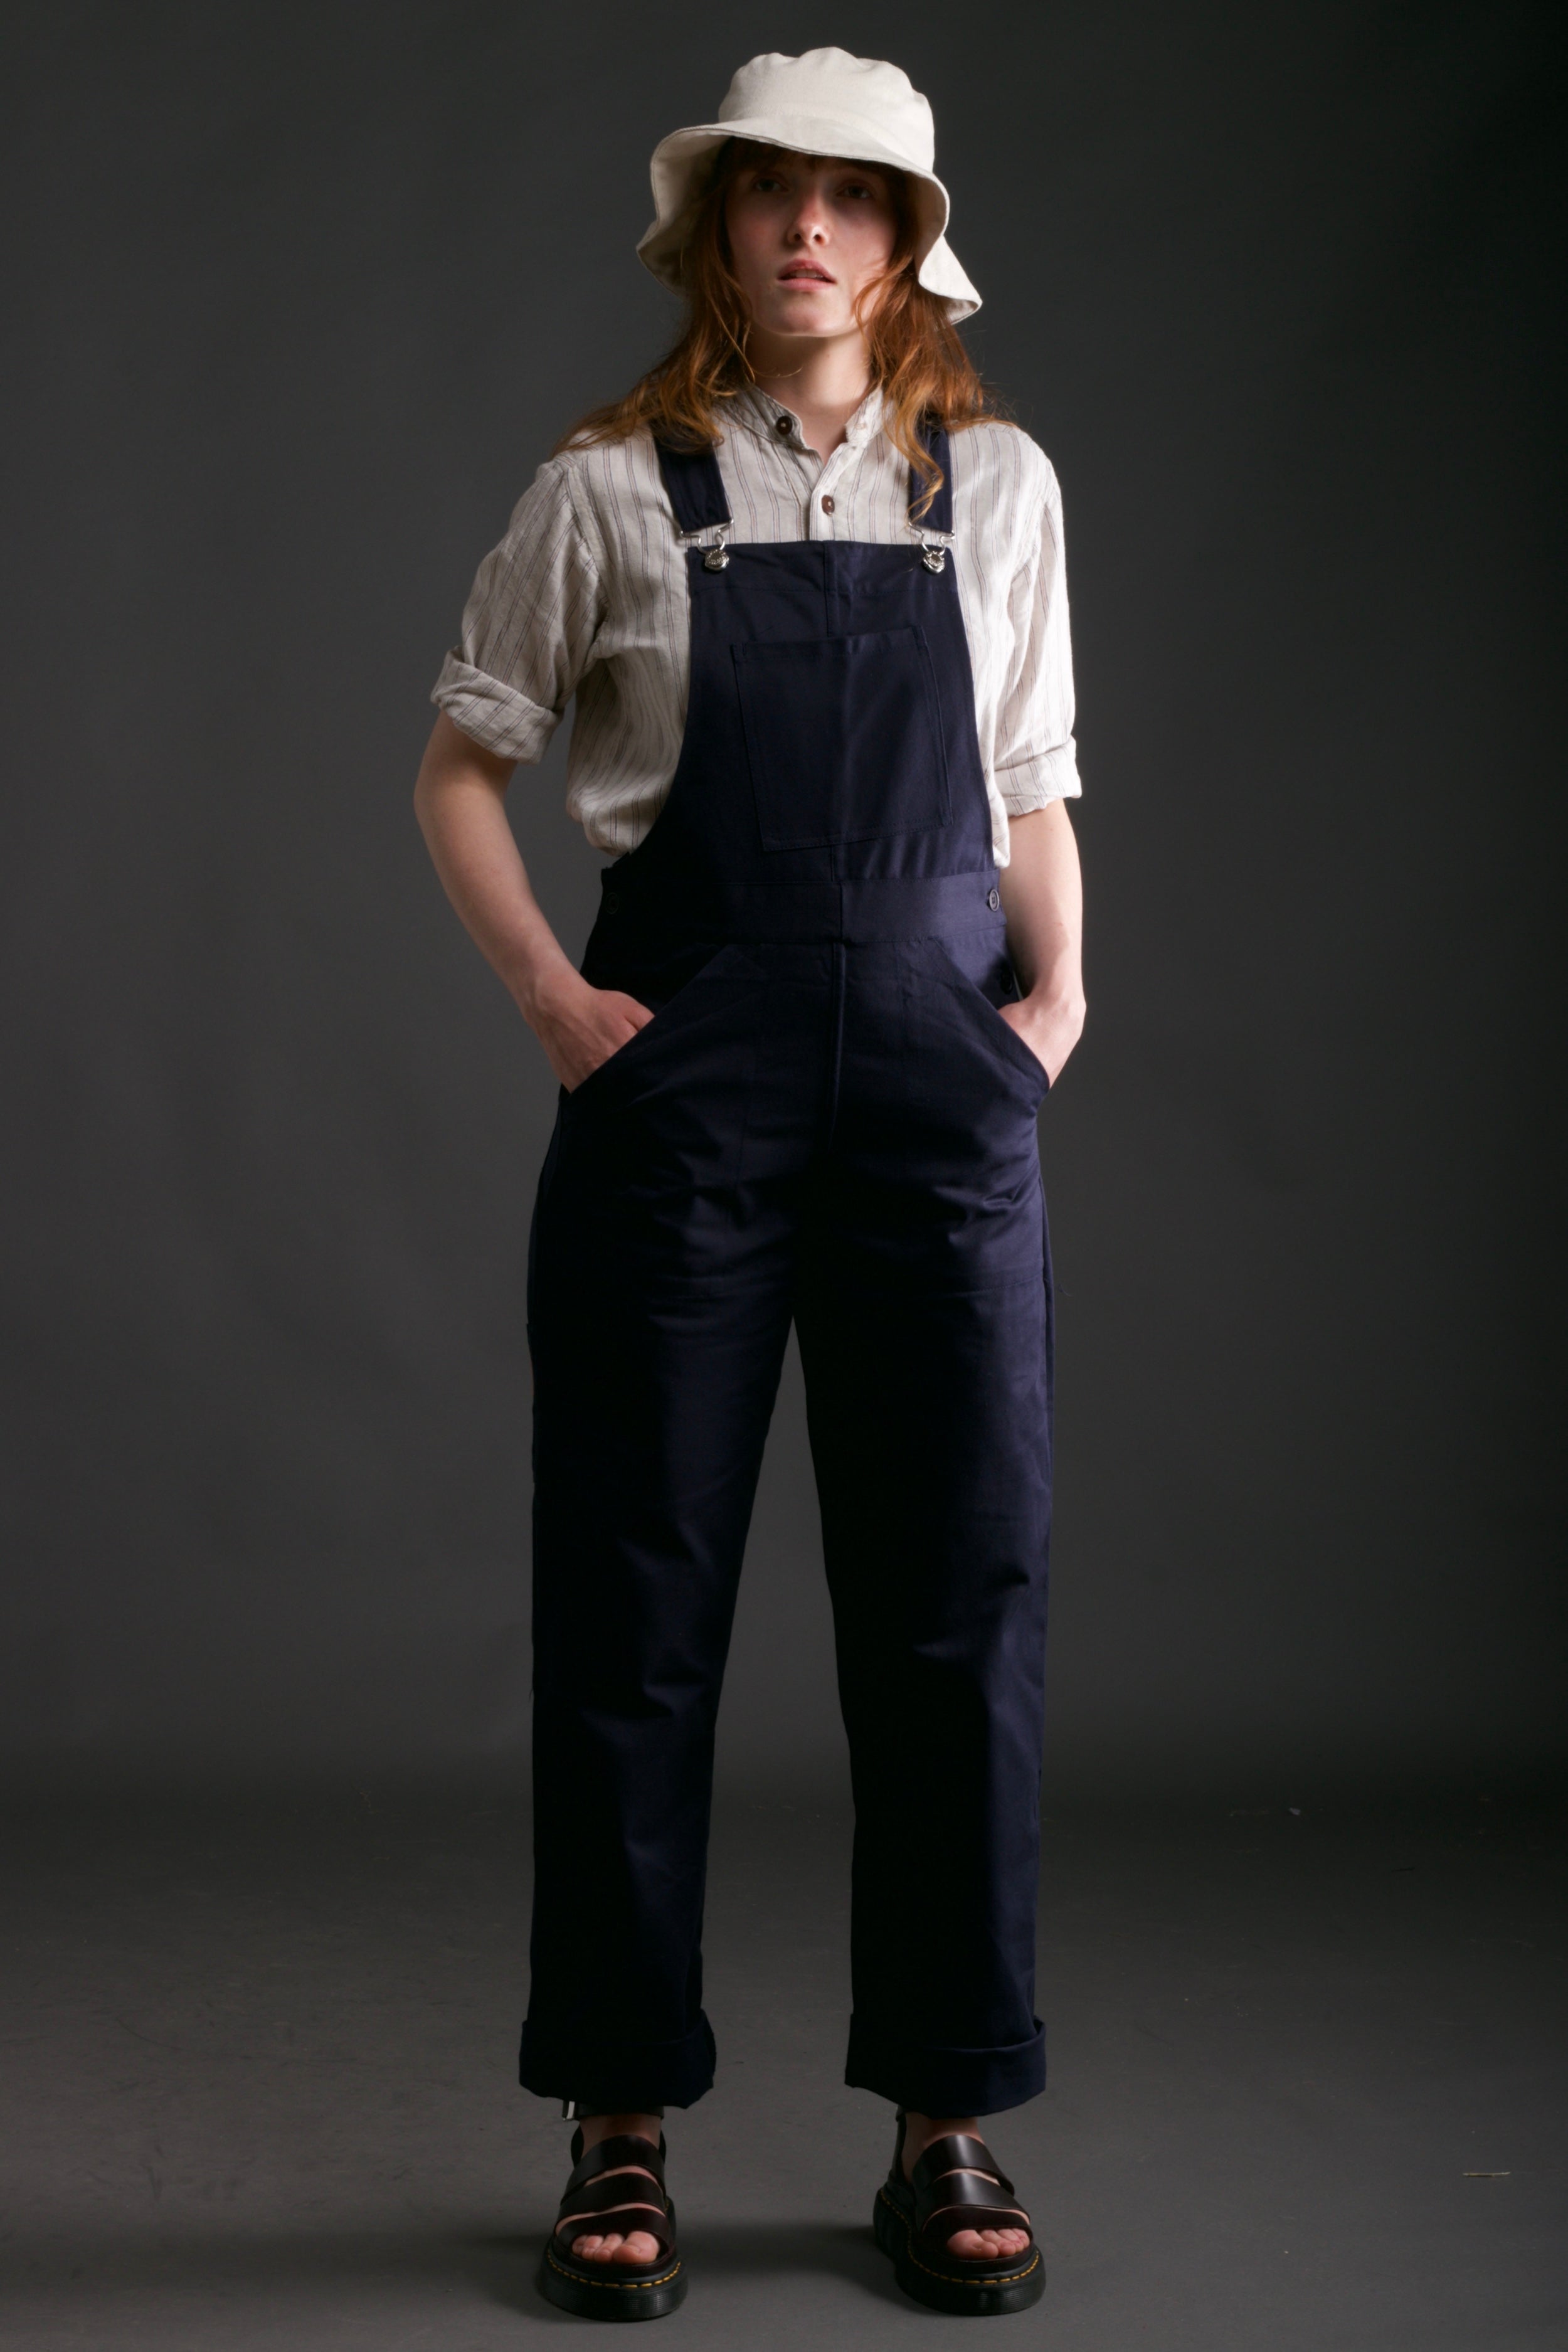 <meta charset="UTF-8"><span>Becky is 5'8", a 12 dress size and is wearing Small dungarees